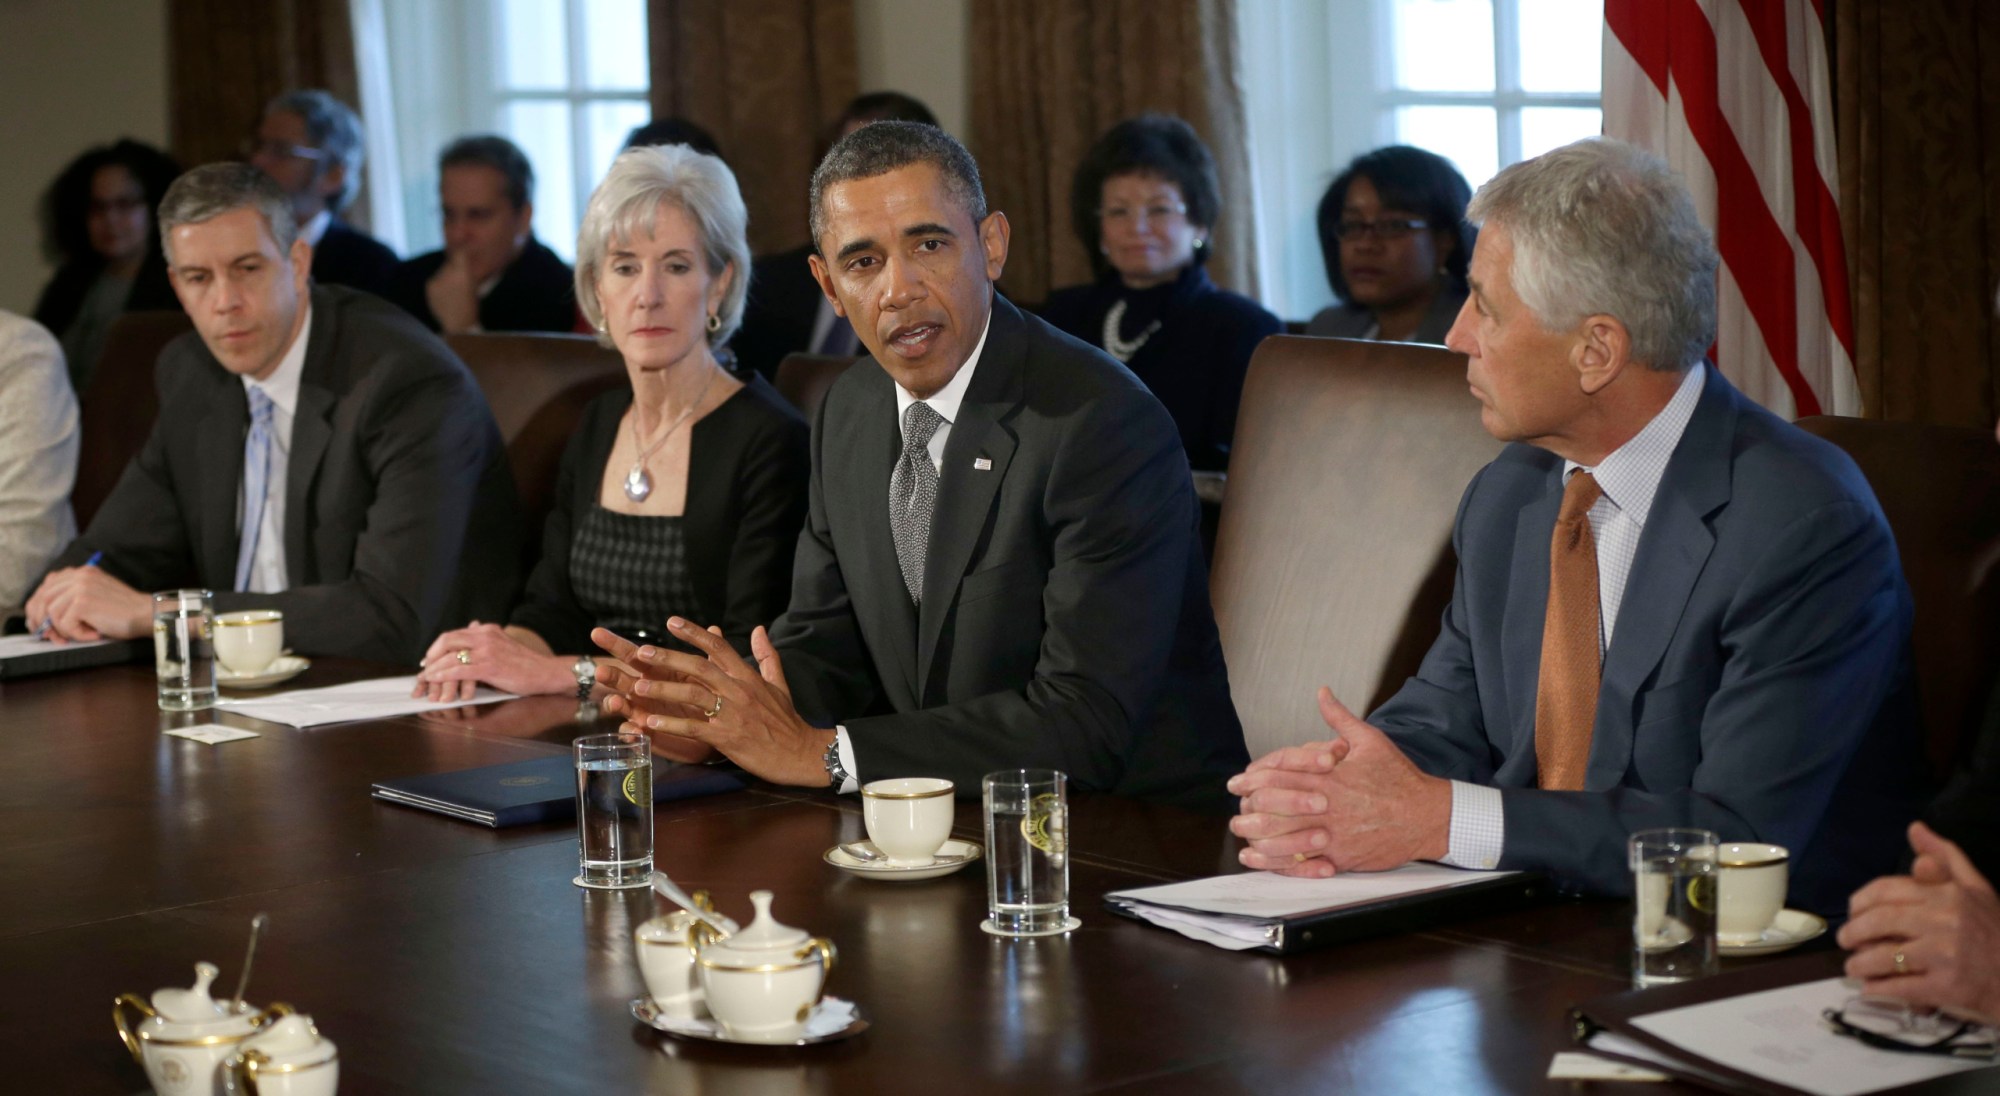 President Barack Obama speaks at the start of a cabinet meeting in the White House. Obama has been criticized for a lack of diversity in his cabinet. (AP/Pablo Martinez Monsivais)